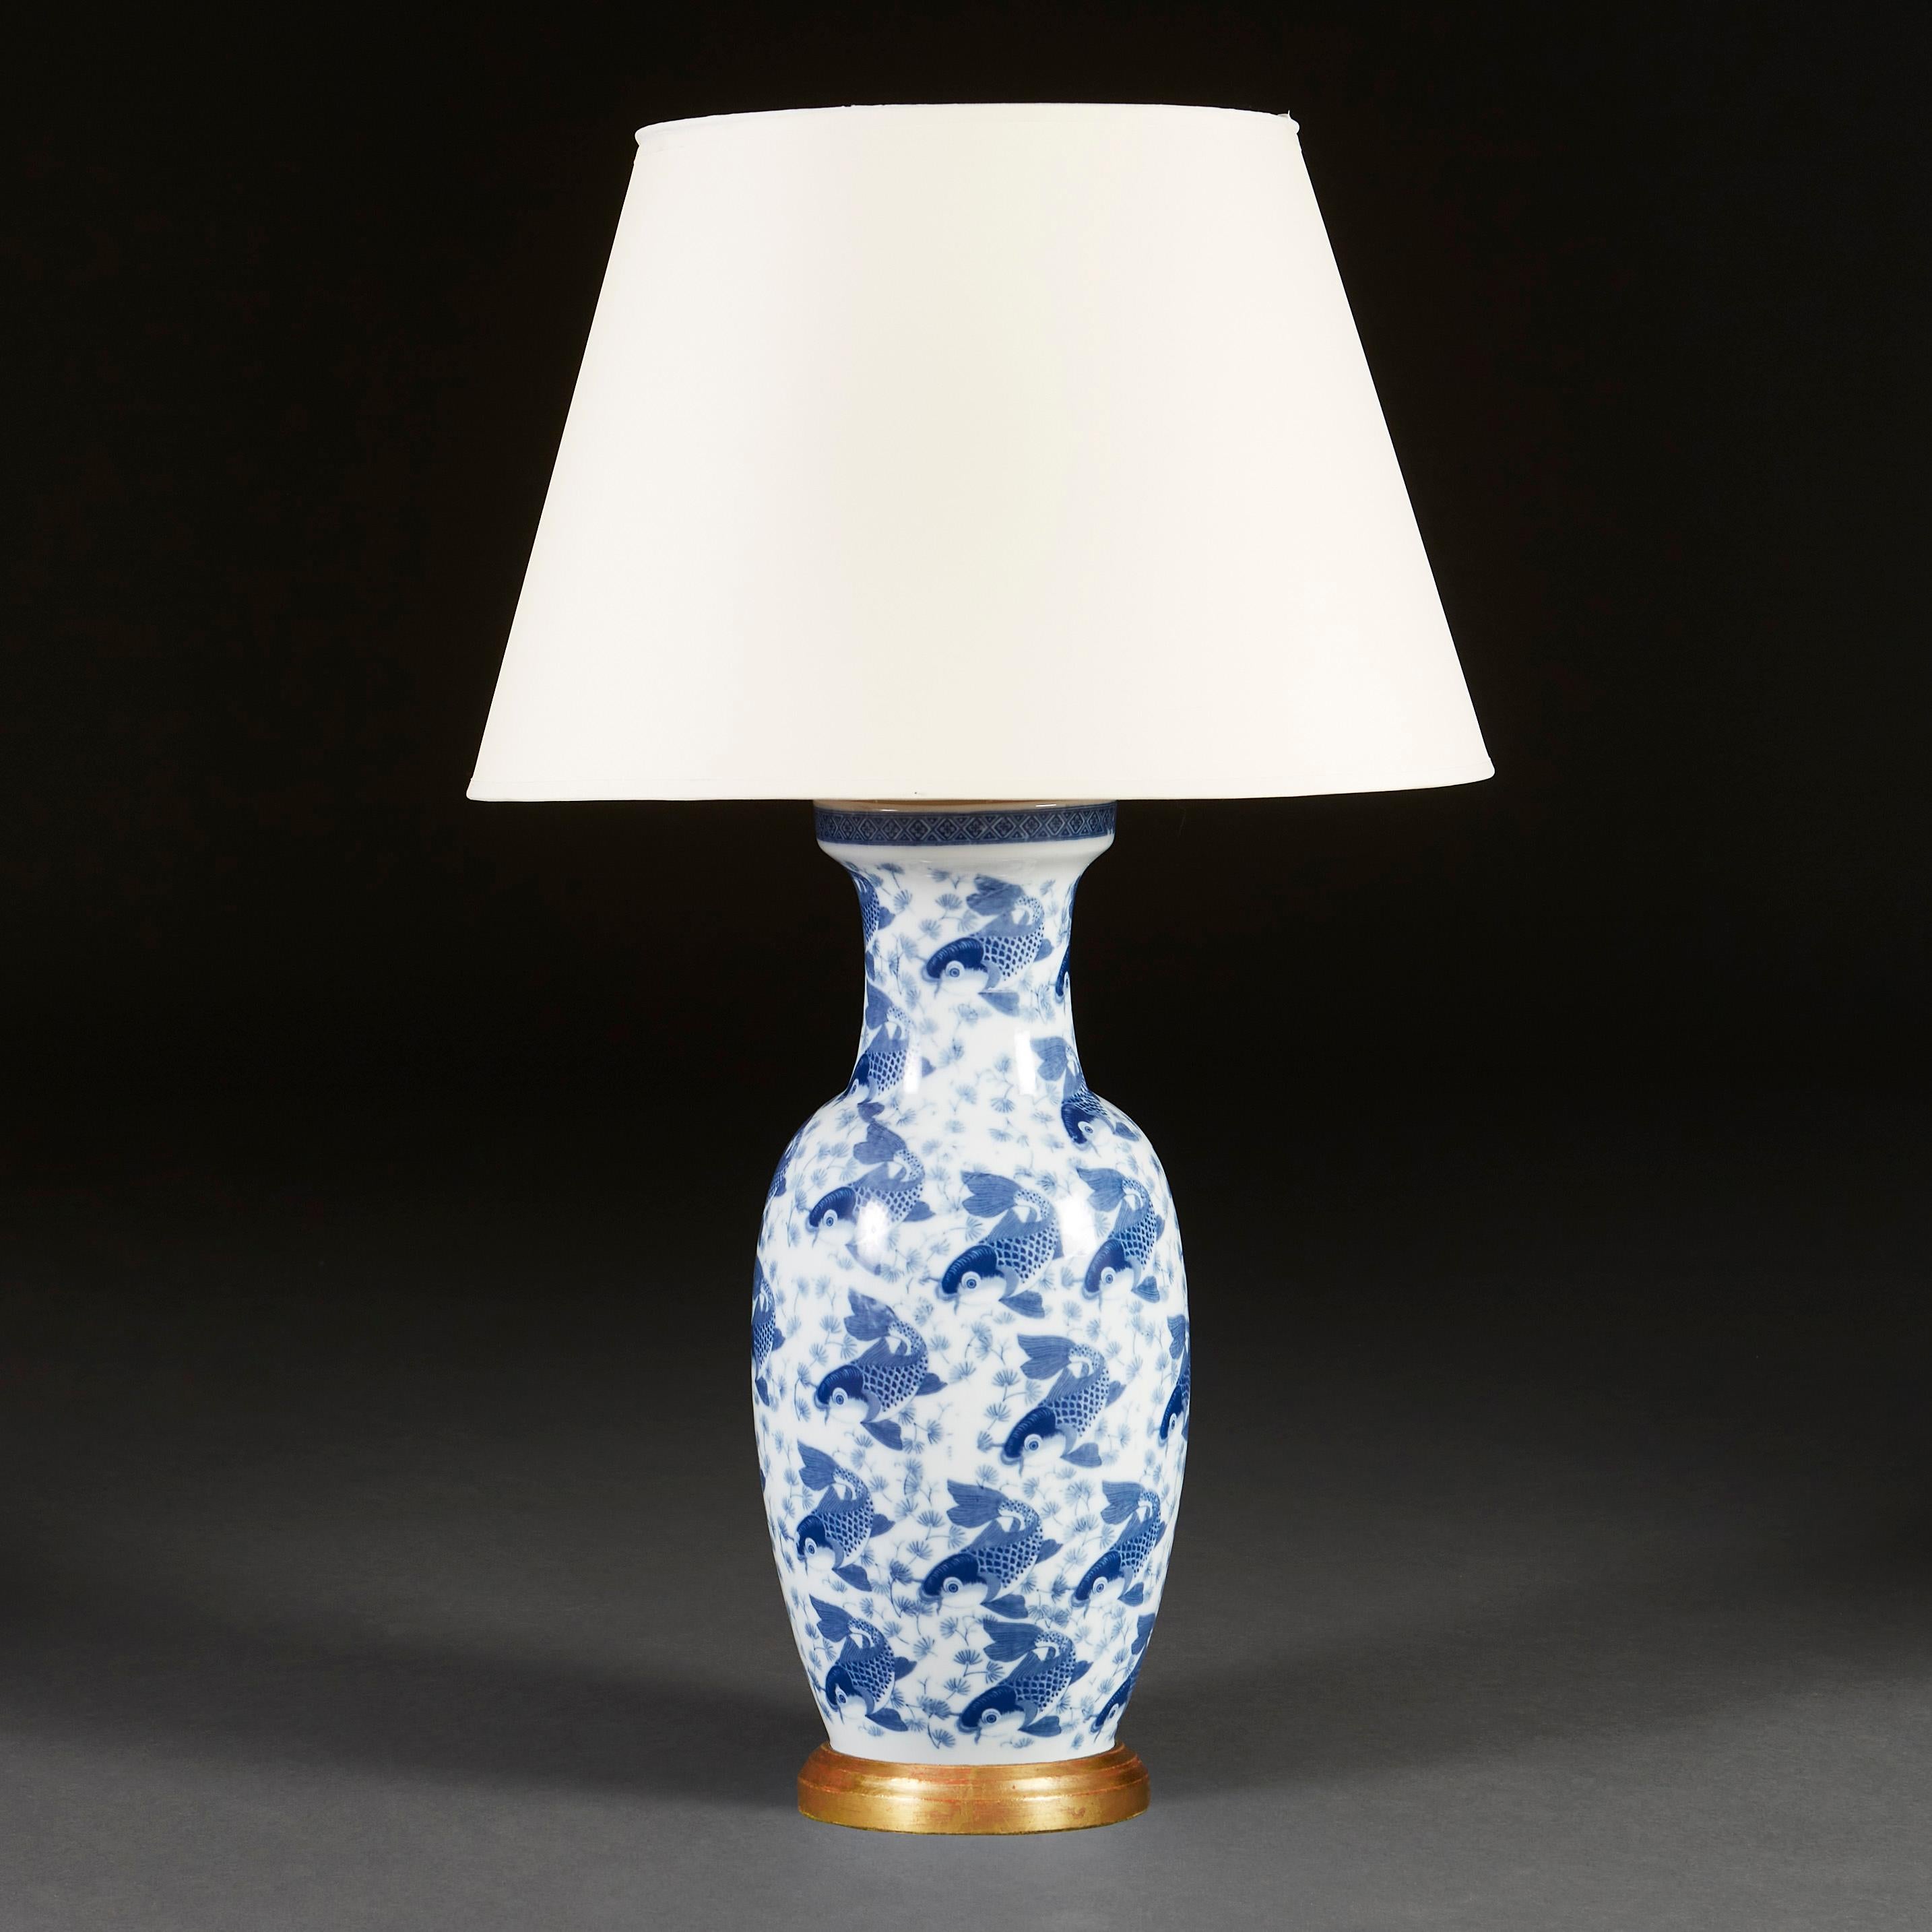 A mid twentieth century blue and white vase of large scale, decorated with swimming carp throughout, now converted as a lamp with a turned giltwood base.

Please note: Lampshade is not included.
Currently wired for the UK with patinated brass plate